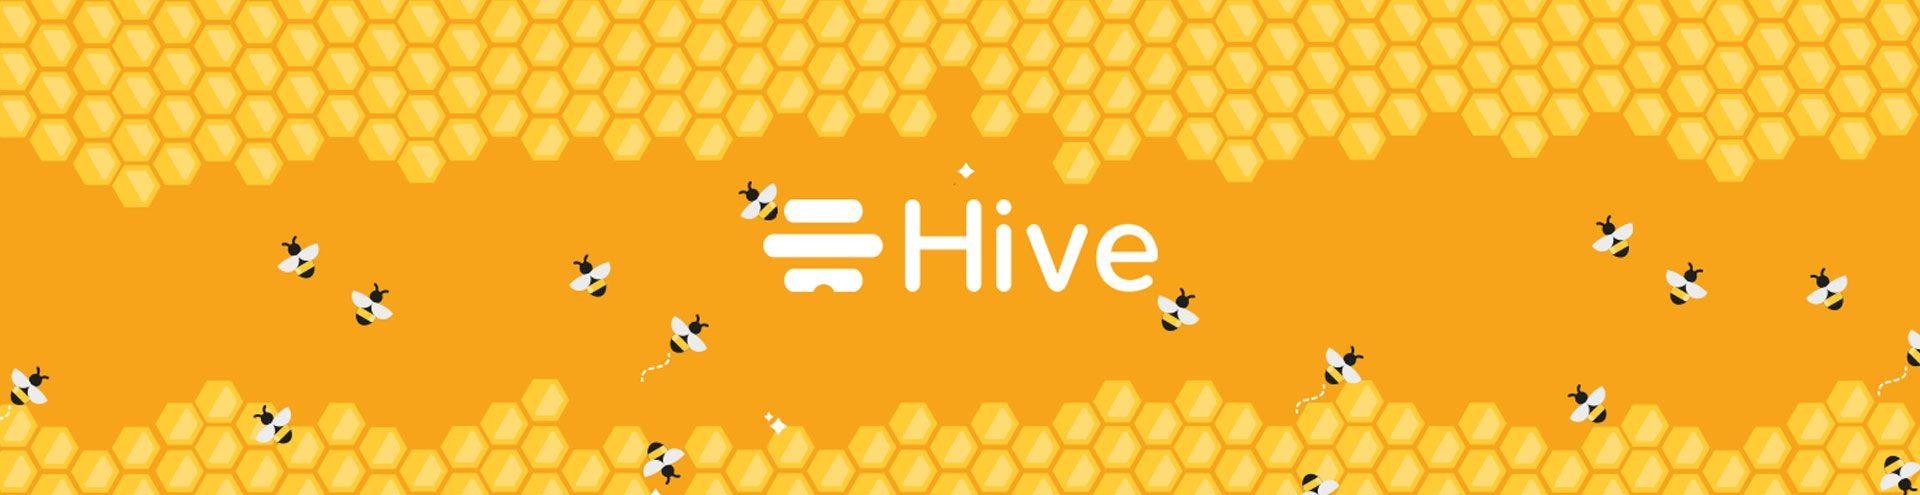 Real-life Success Story That Inspires: Project Management Software - Hive